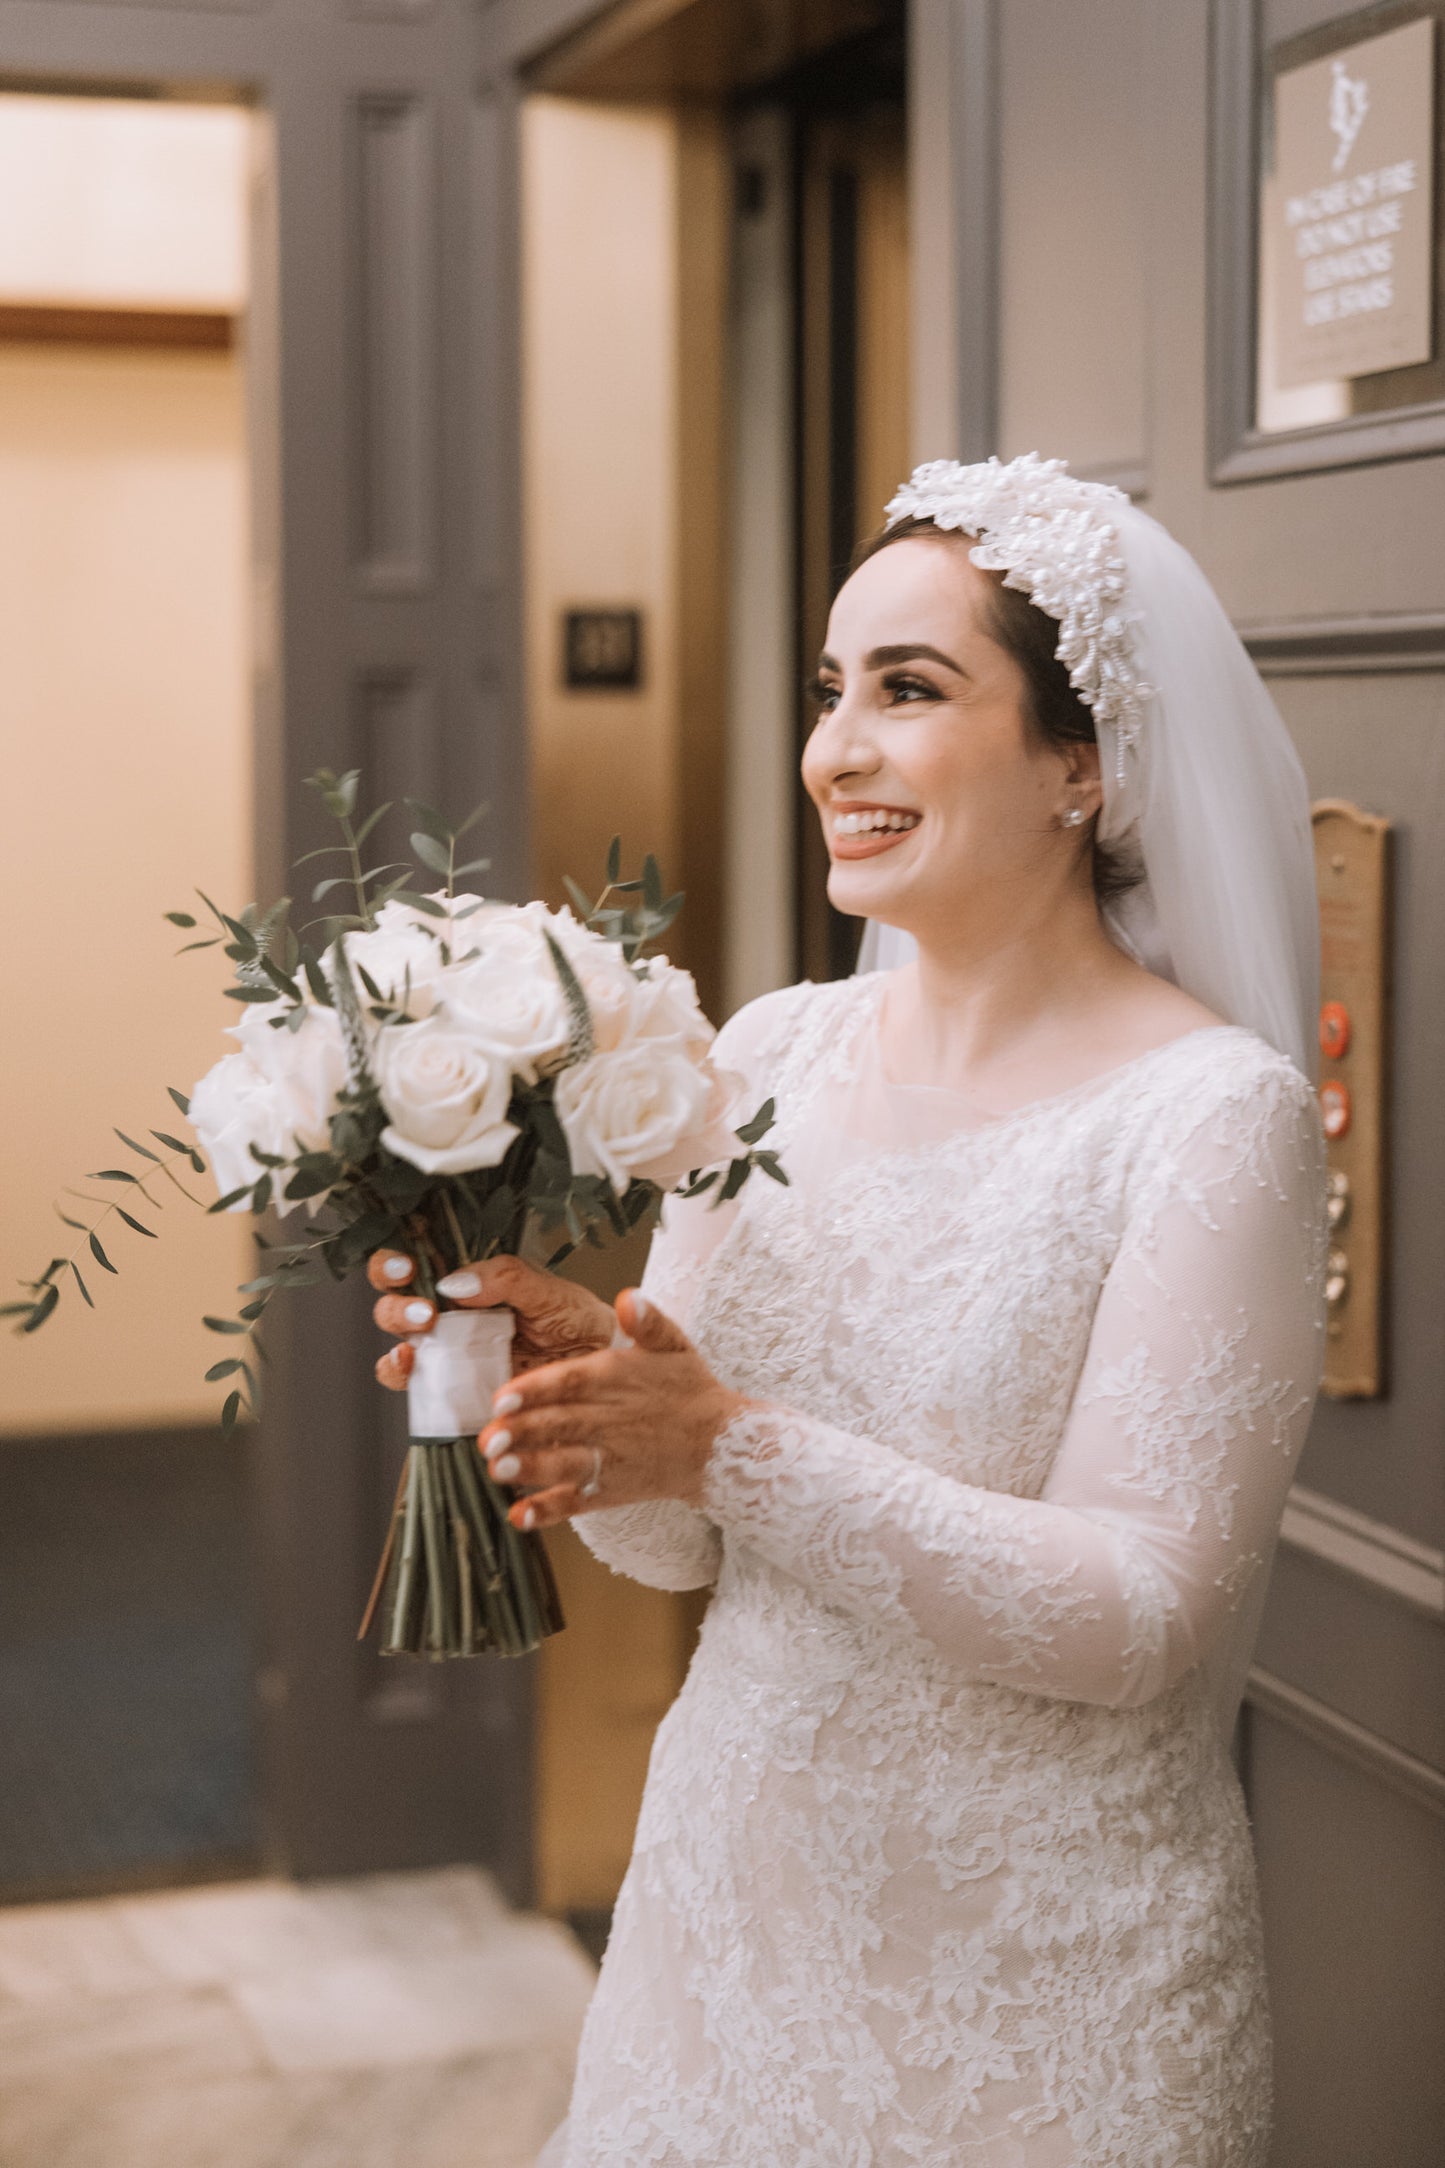 PEARL HEADBAND VEIL : Made With Love, Unique Bridal